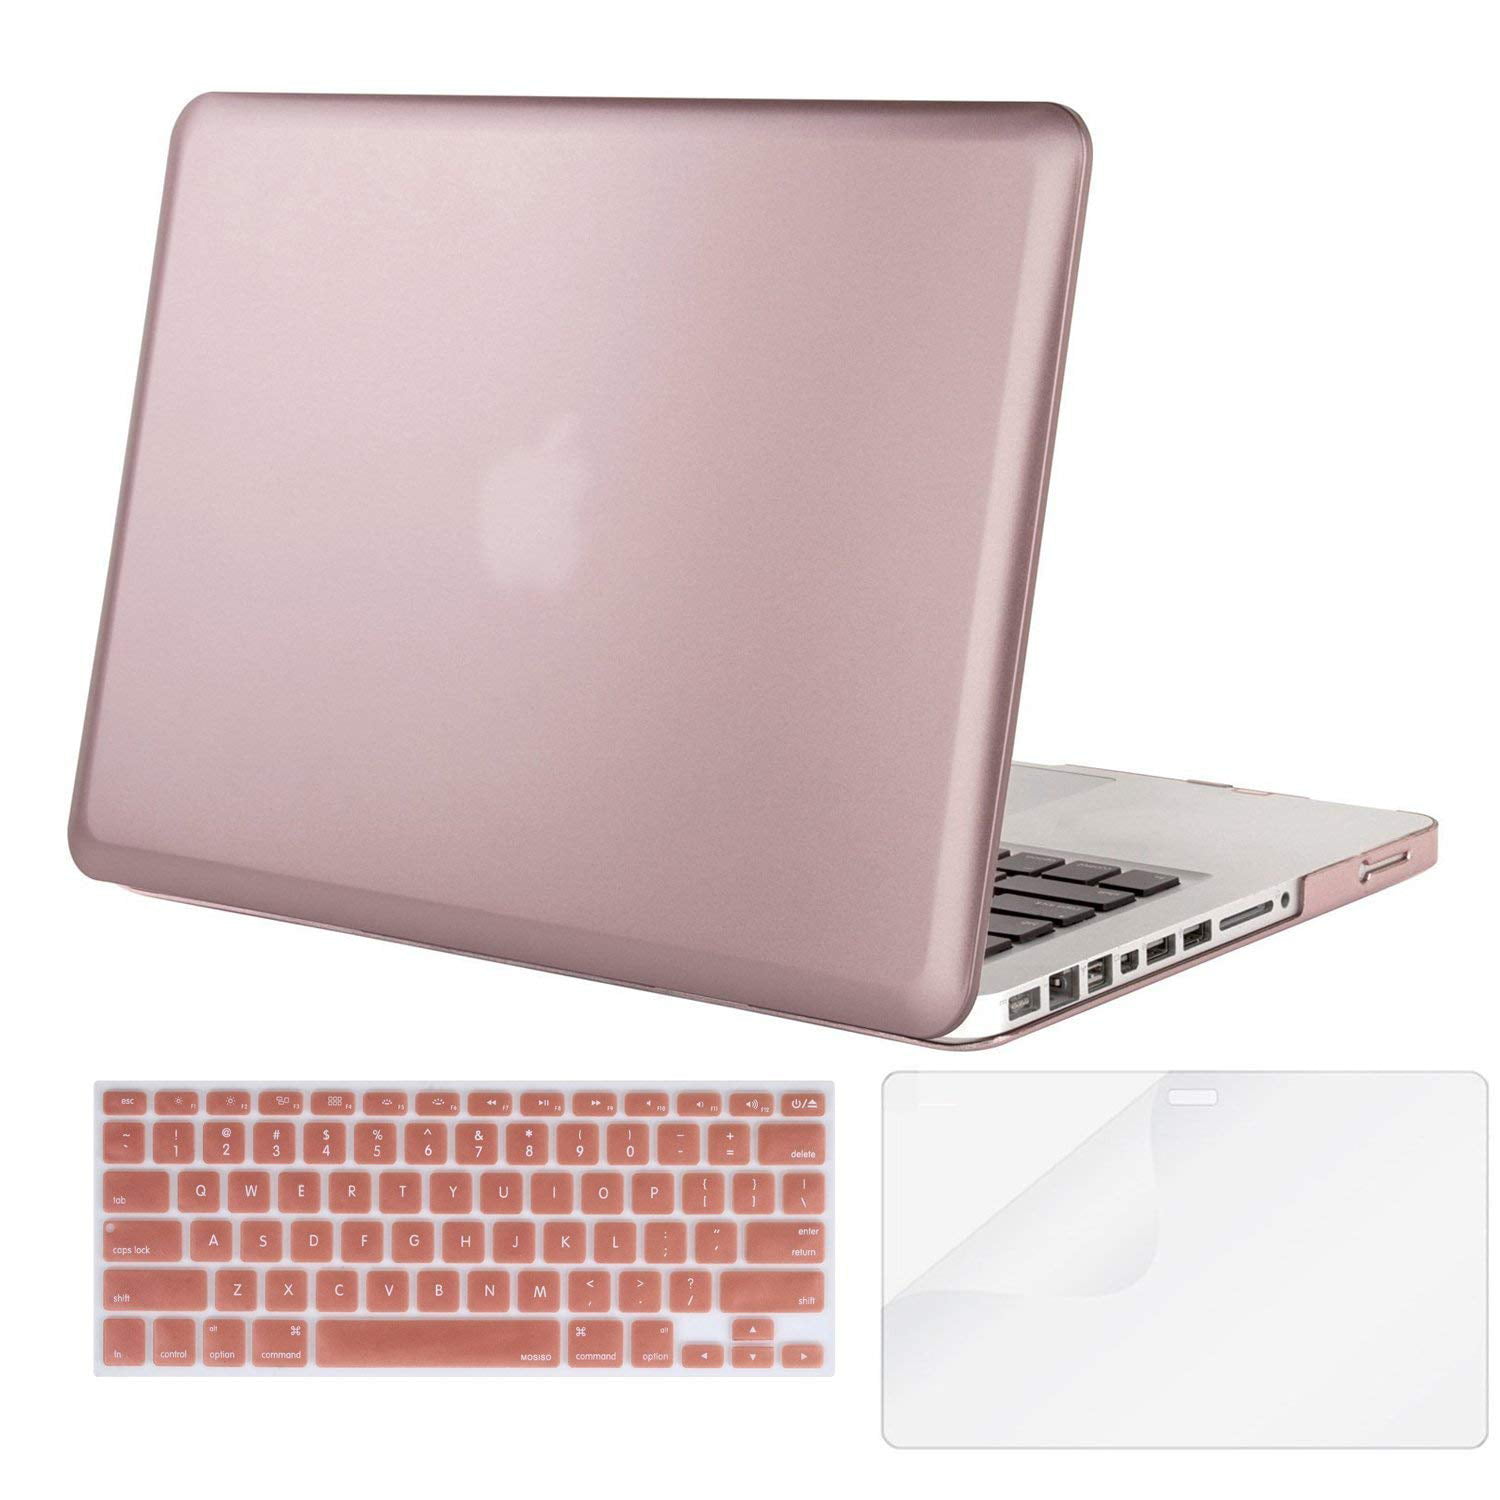 Pink Marble Model: A1278, Version Early 2012/2011/2010/2009/2008 Mosiso Plastic Hard Case Cover Only Compatible Old MacBook Pro 13 Inch with CD-ROM